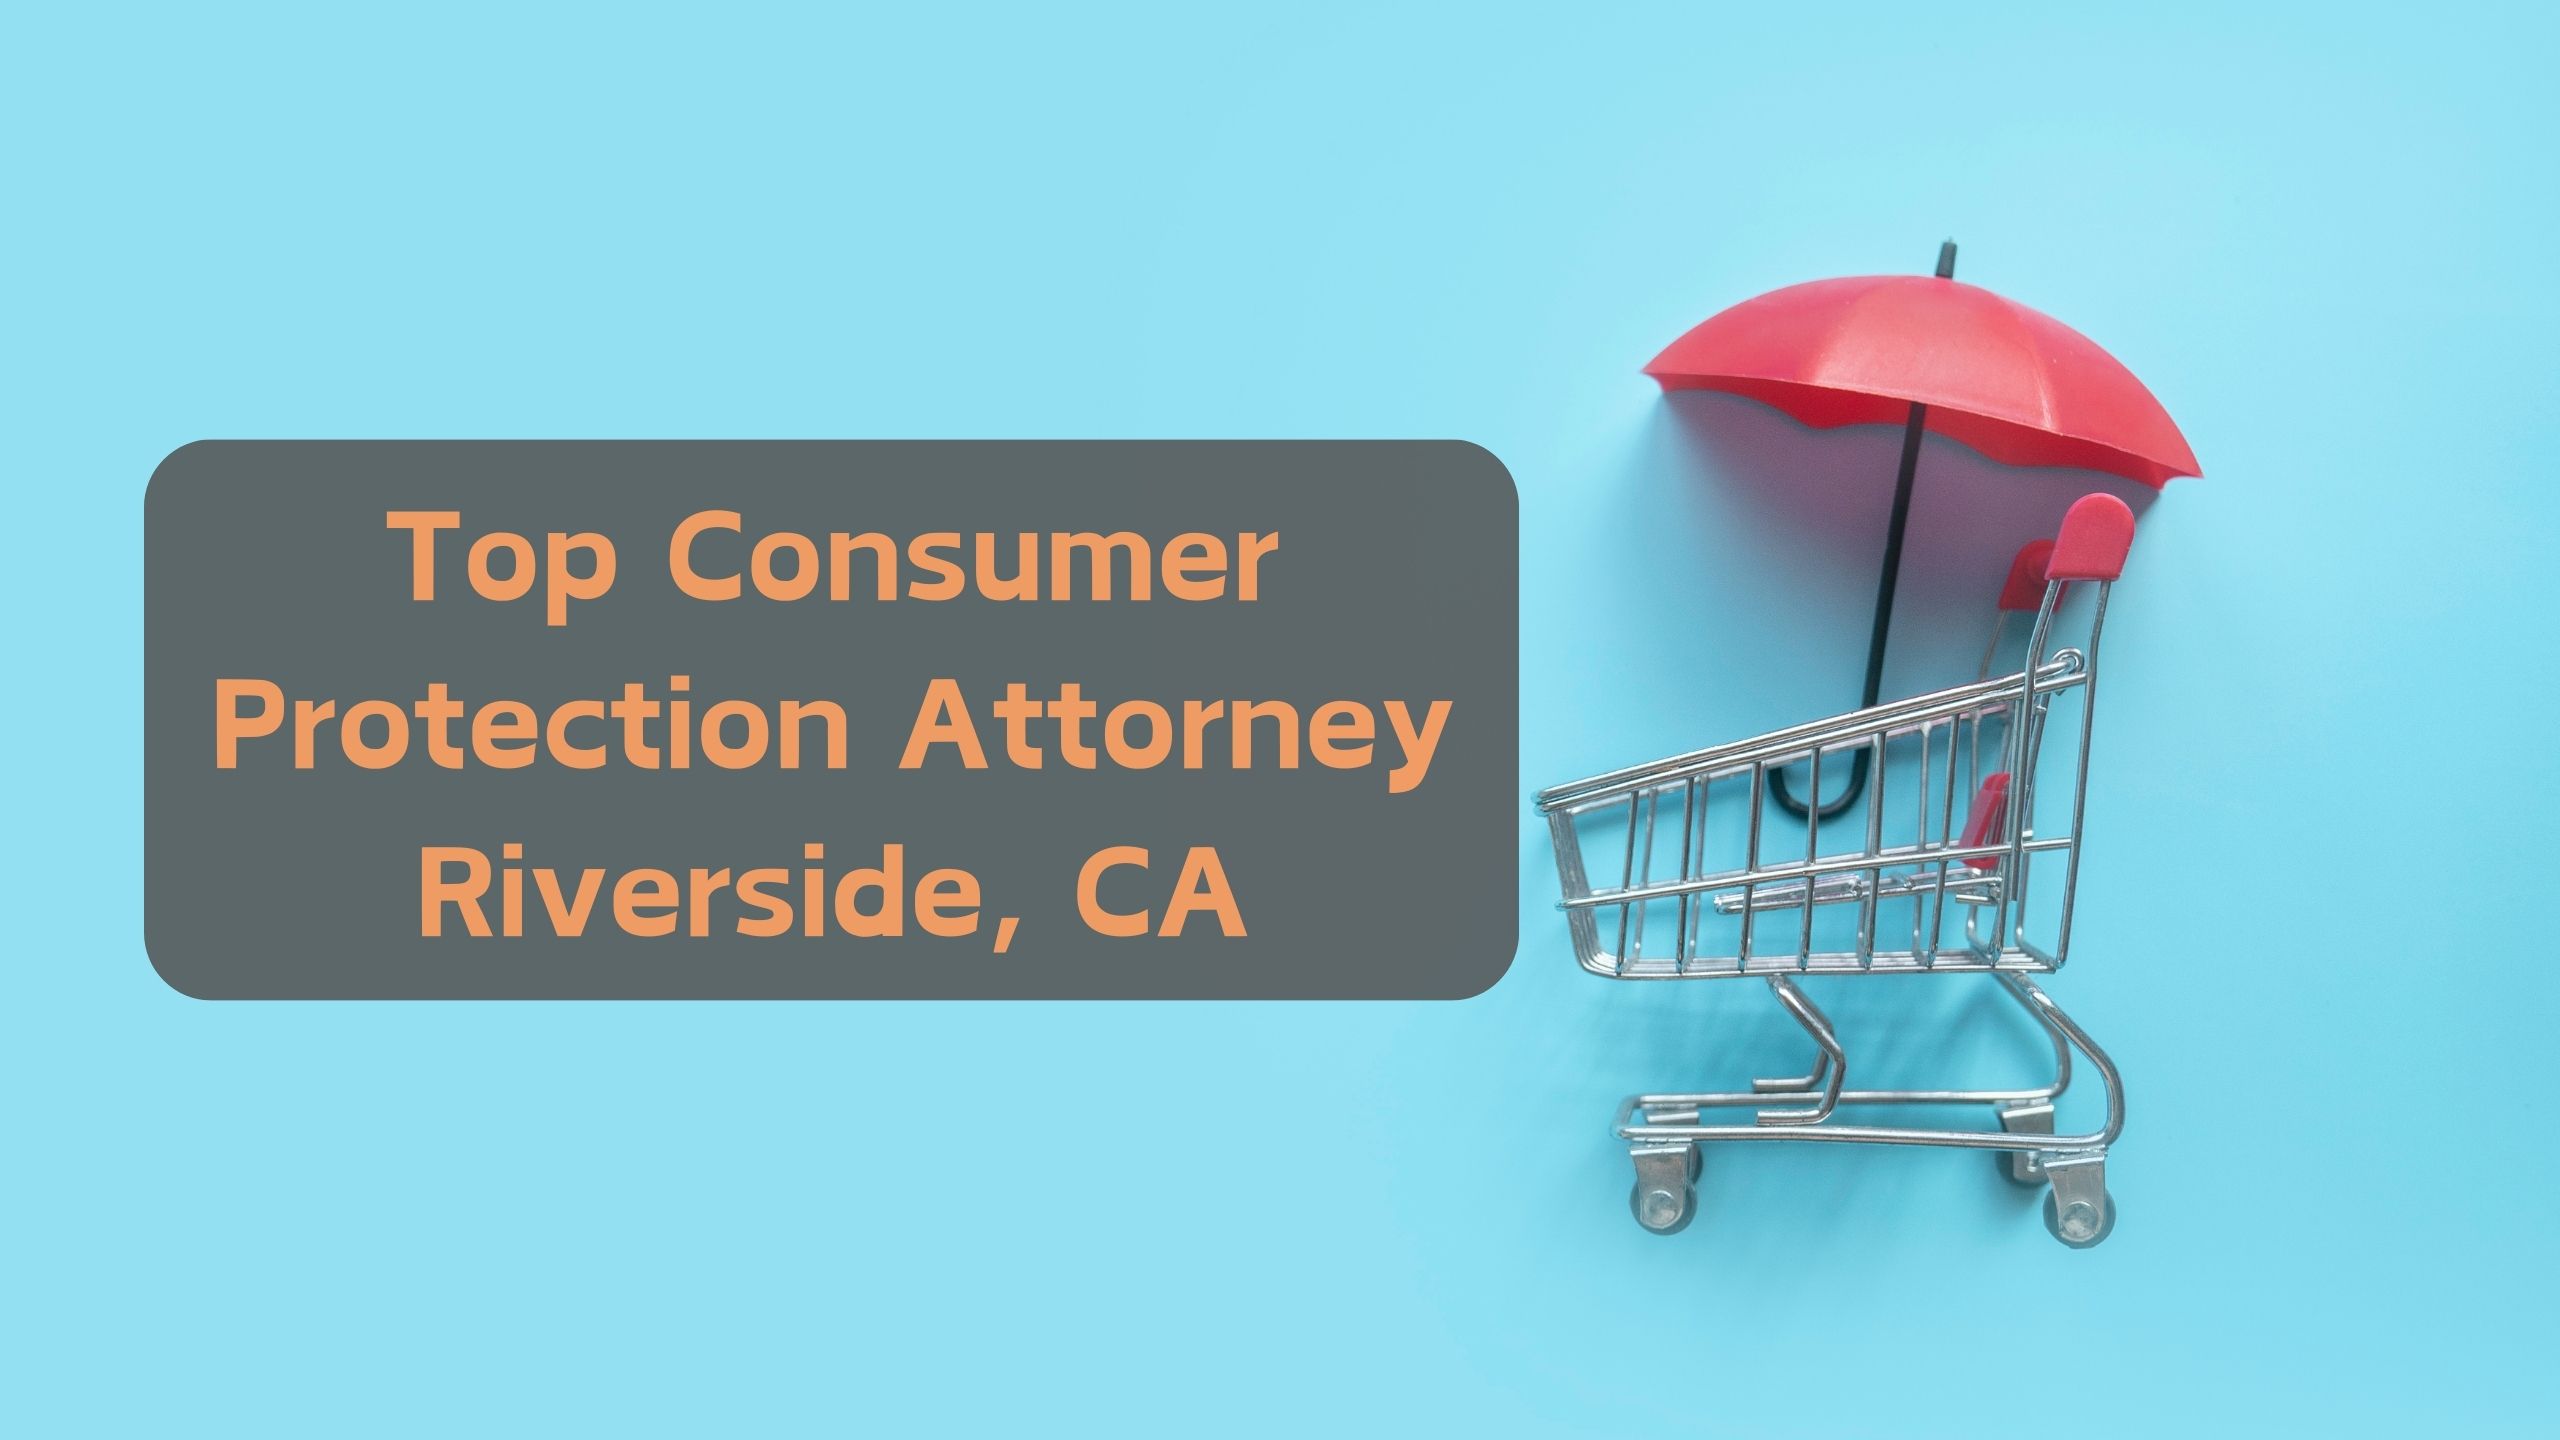 Top Consumer Protection Attorneys Riverside